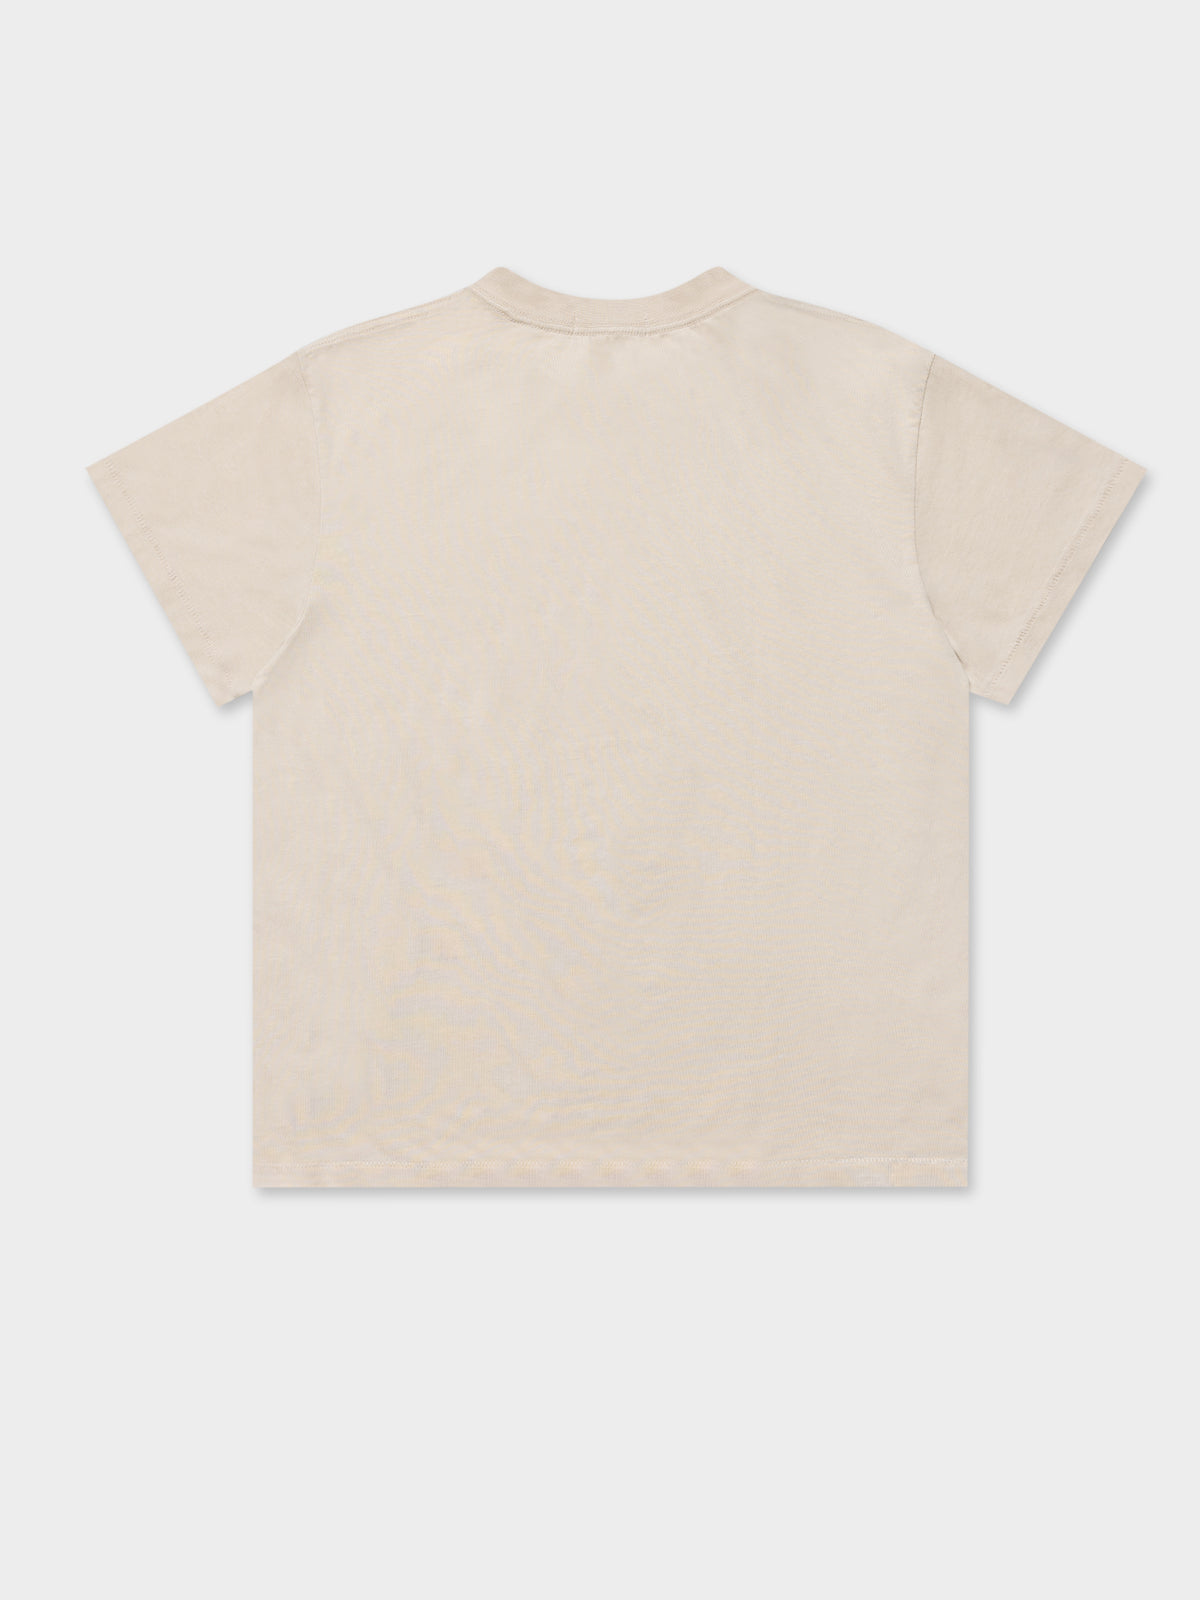 Wings T-Shirt in Alabaster